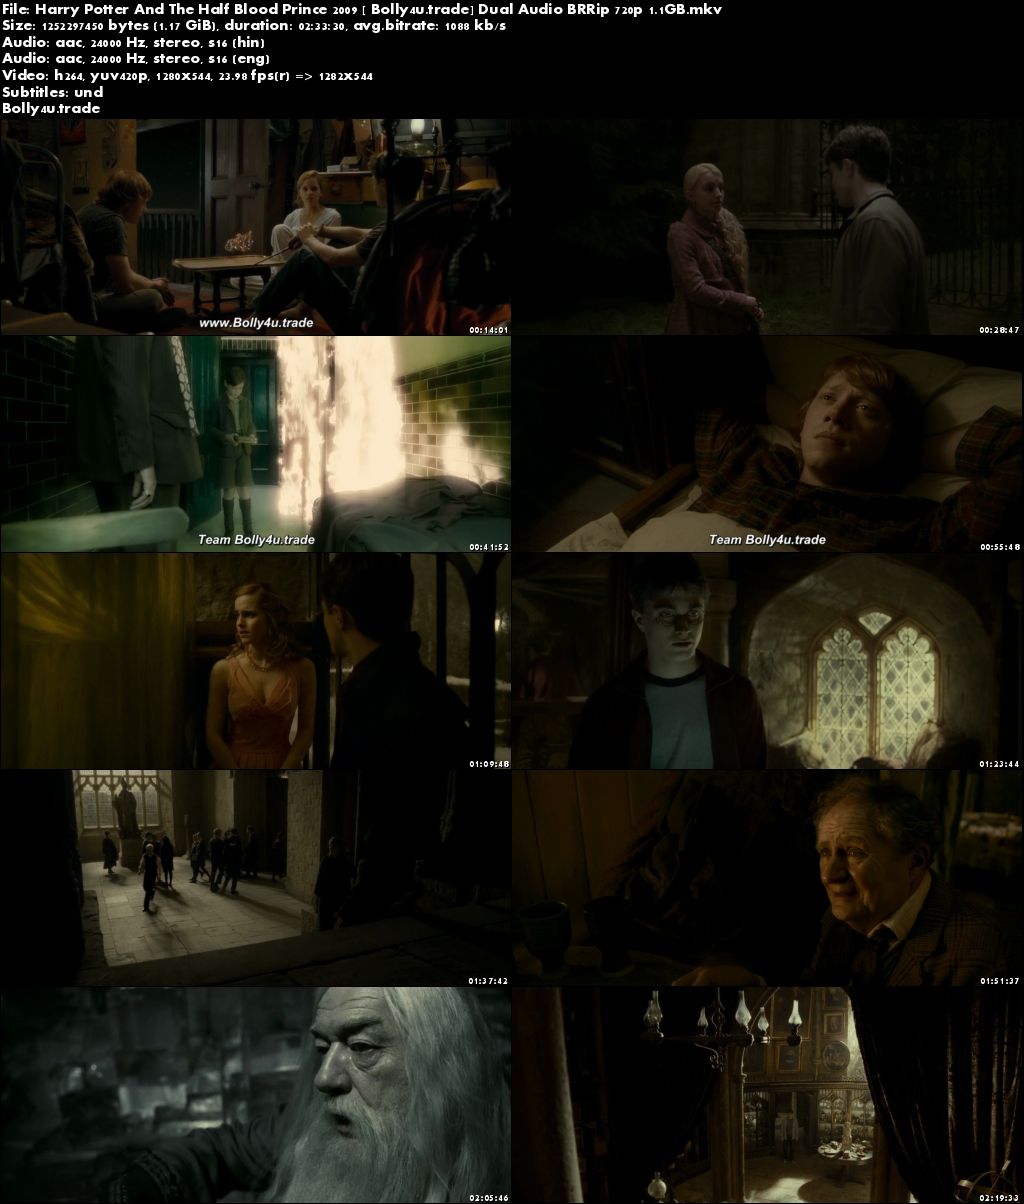 Harry Potter And The Half Blood Prince 2009 BRRip Hindi Dual Audio 720p Download